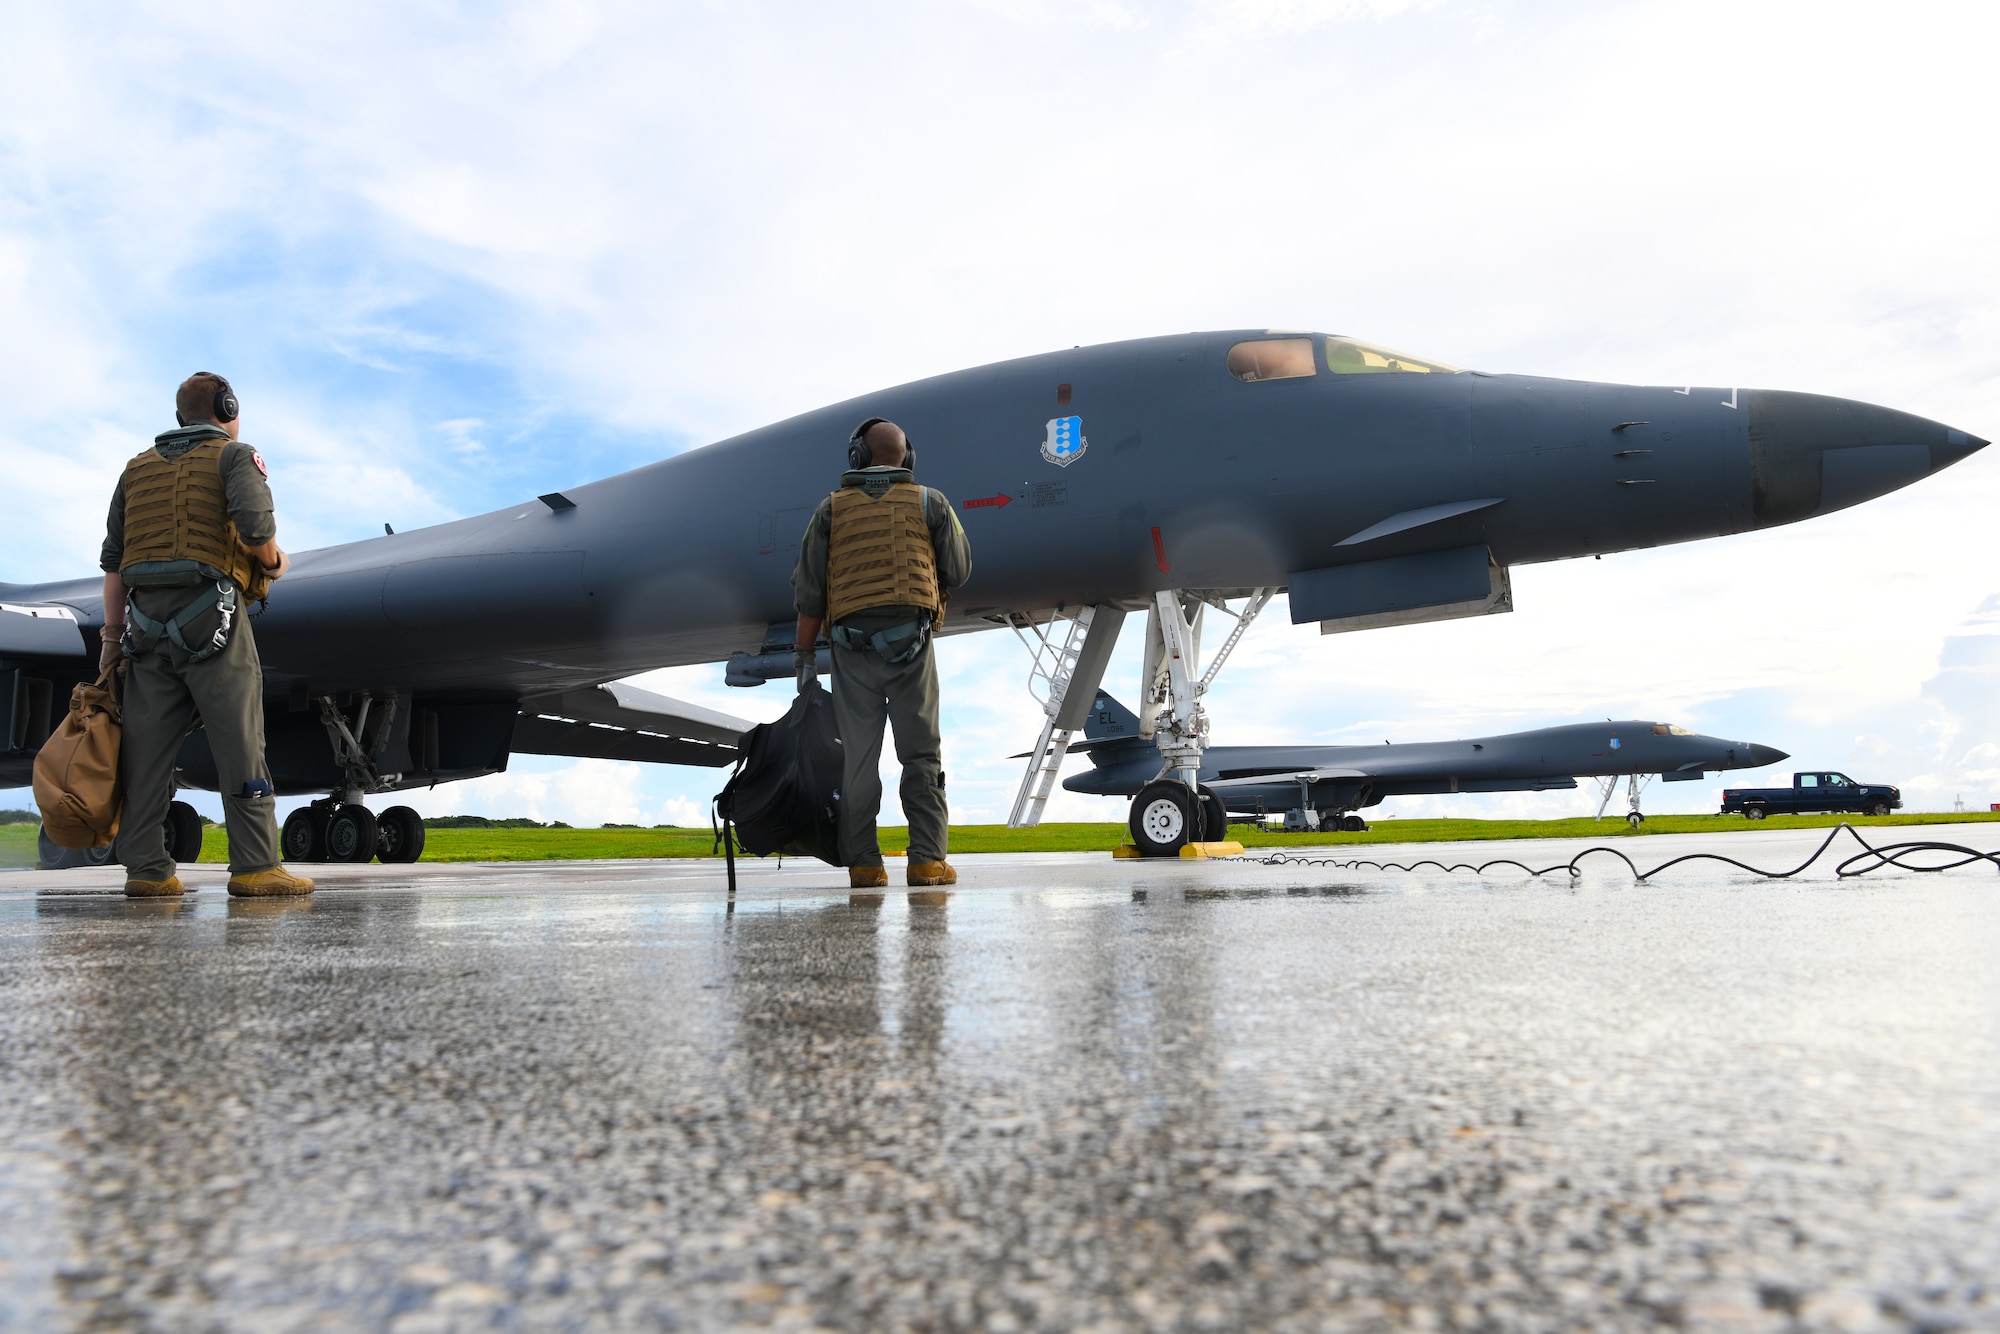 Aircrew assigned to the 34th Expeditionary Bomb Squadron, Ellsworth Air Force Base, S.D., prepare to board a B-1B Lancer in support of Exercise Valiant Shield at Andersen AFB, Guam, Sept. 18, 2020. The participating forces will exercise a wide range of capabilities and demonstrate the inherent flexibility of joint forces. The range of capabilities include maritime security operations, anti-submarine and air-defense exercises, amphibious operations, and other elements in complex warfighting. (U.S. Air Force photo by Staff Sgt. Nicolas Z. Erwin)